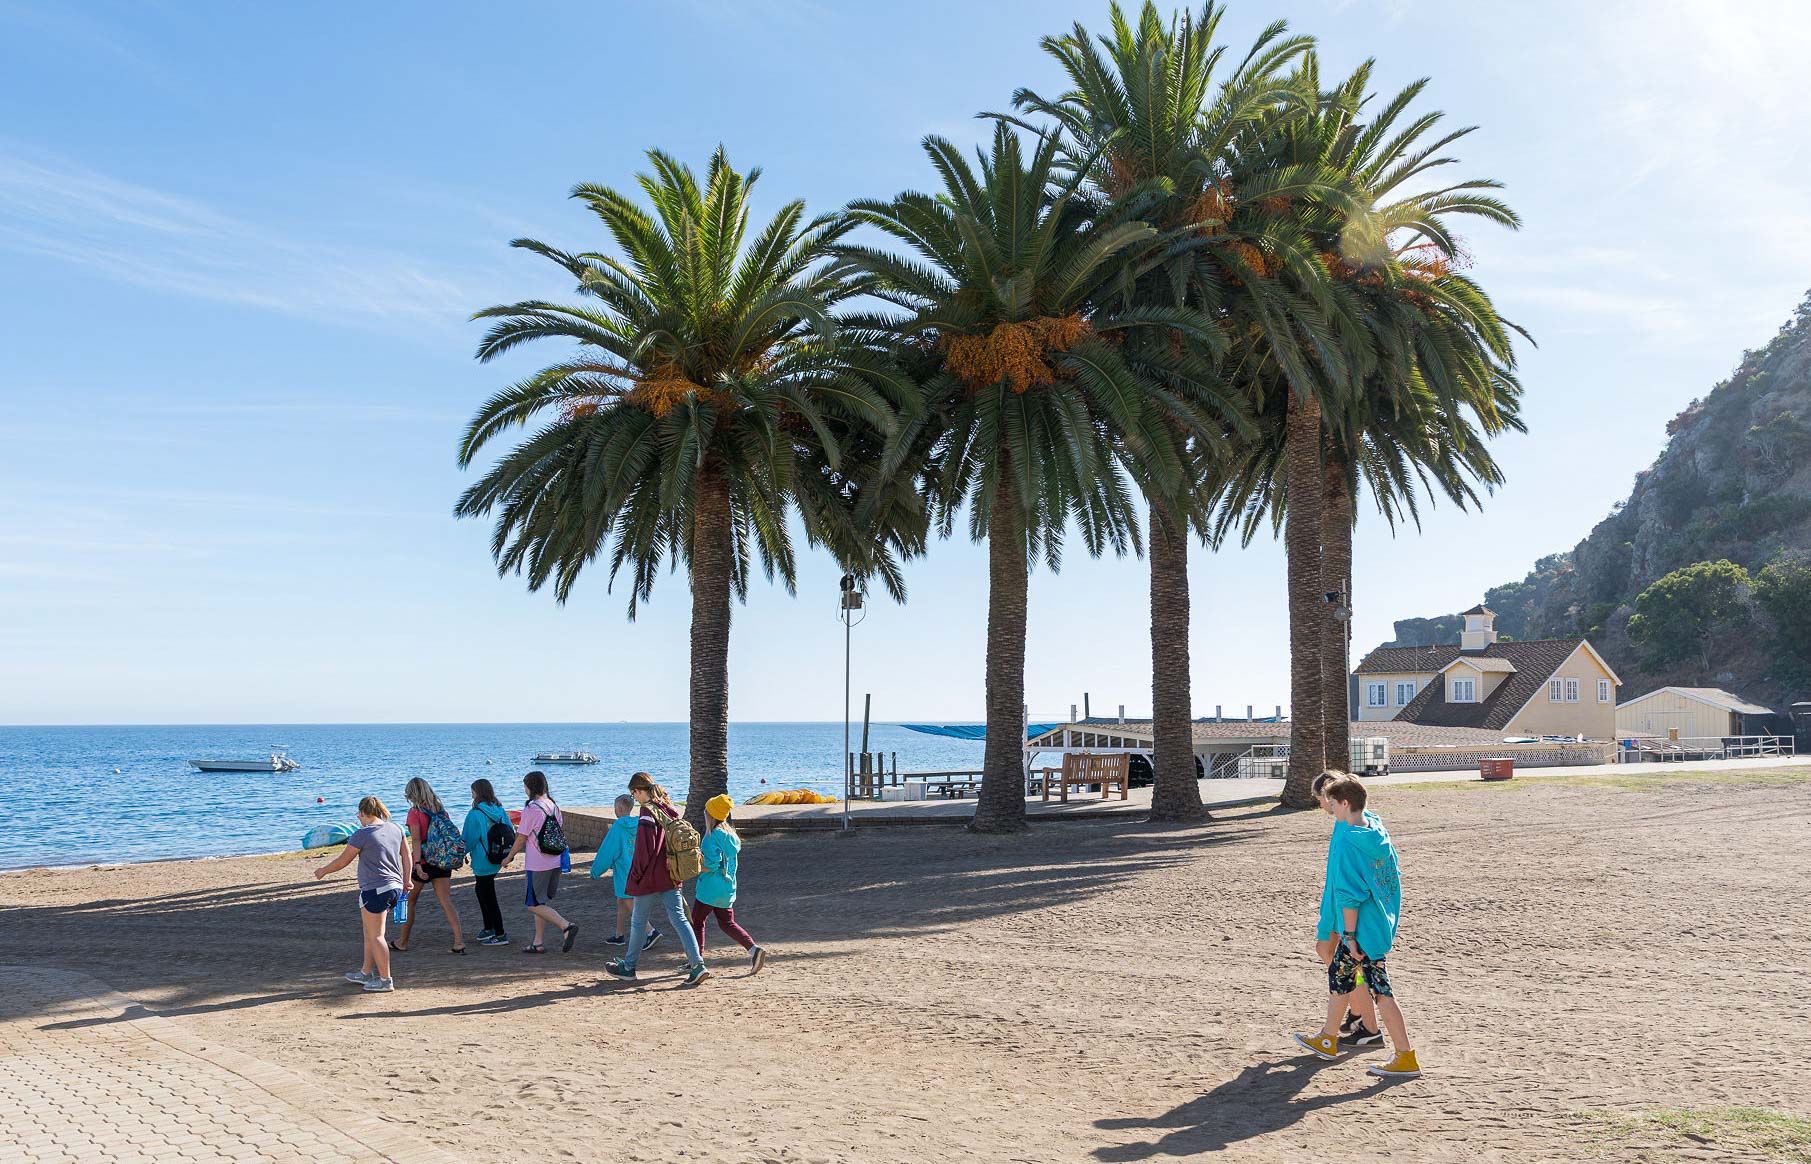 Campers walking on a beach with palm trees in the background.